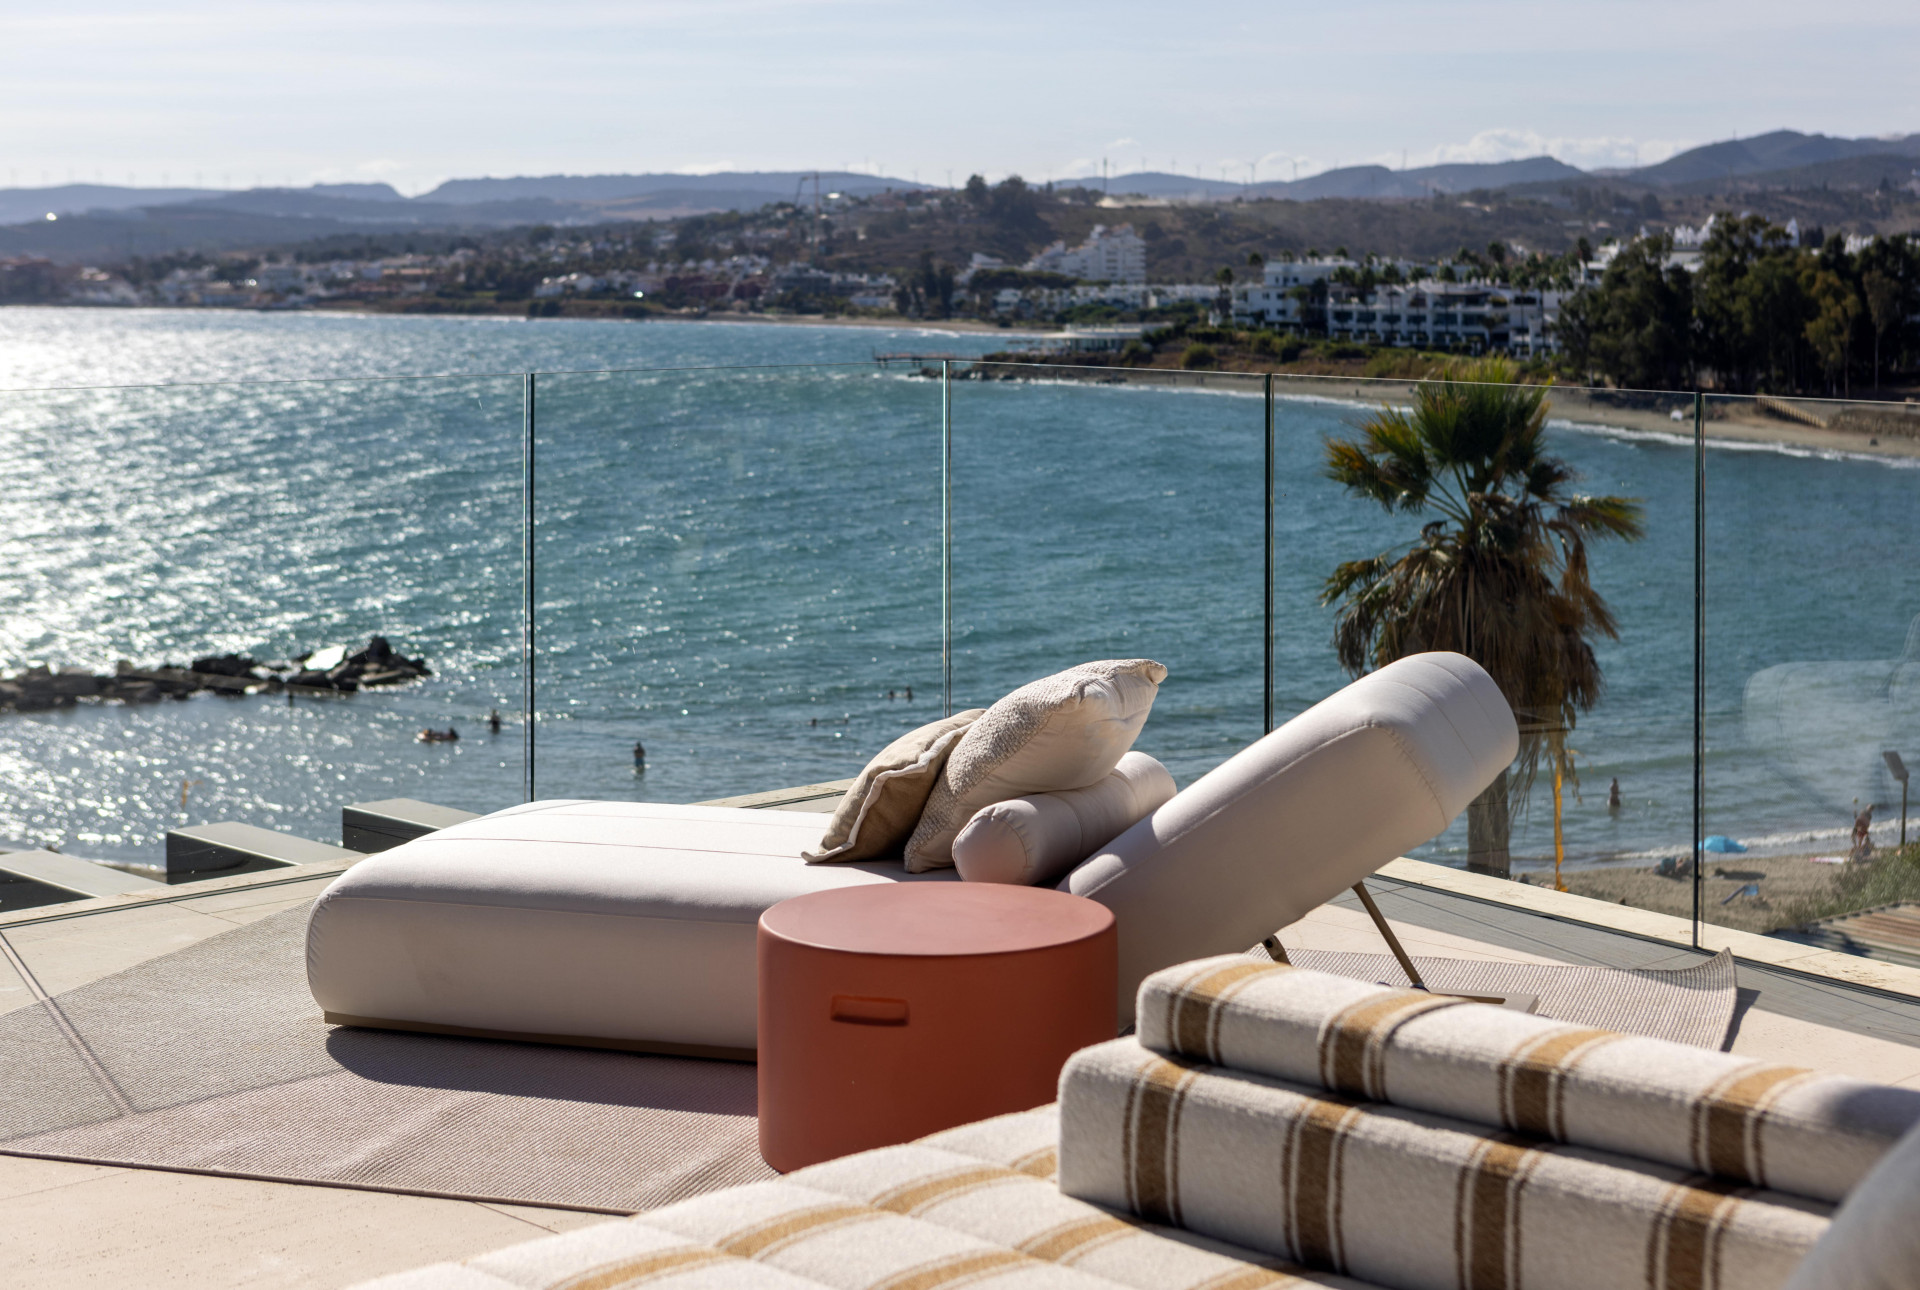 Luxury and exclusive seaside development of nine apartments located on a beautiful bay in Estepona